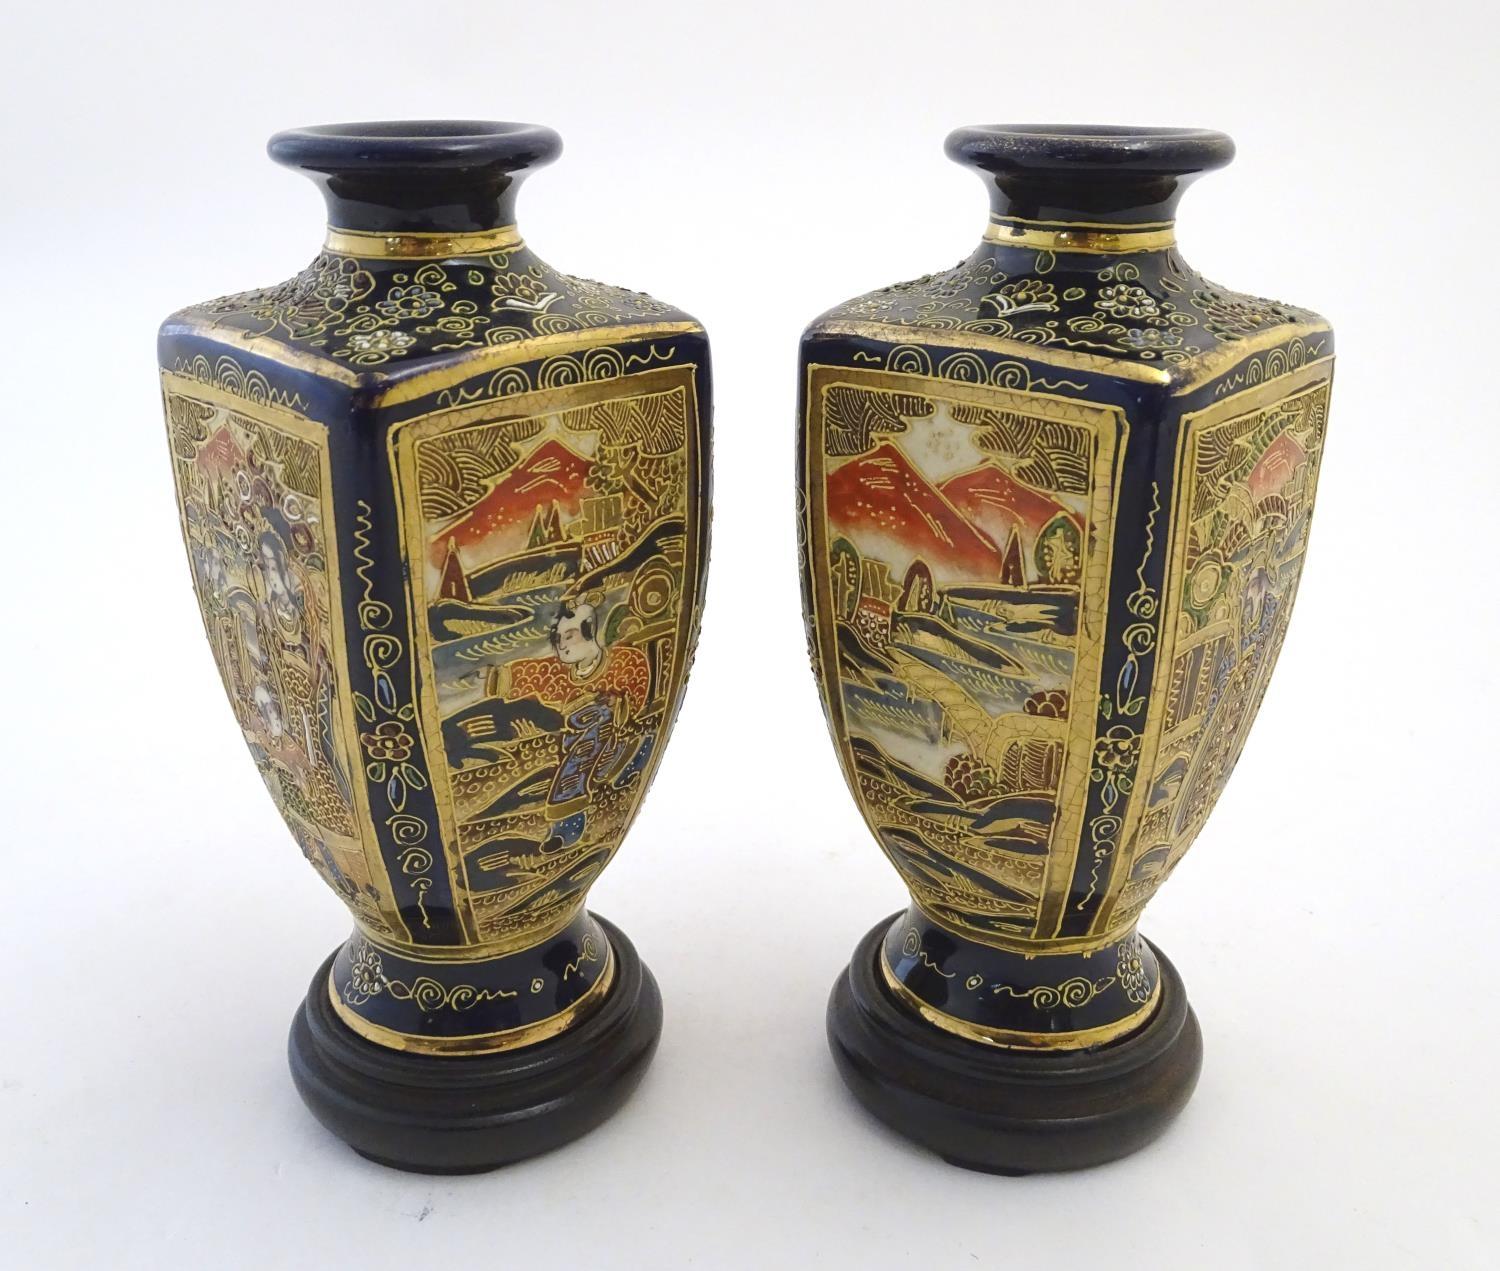 A pair of Japanese Satsuma vases of square baluster form with a cobalt blue ground, with panelled